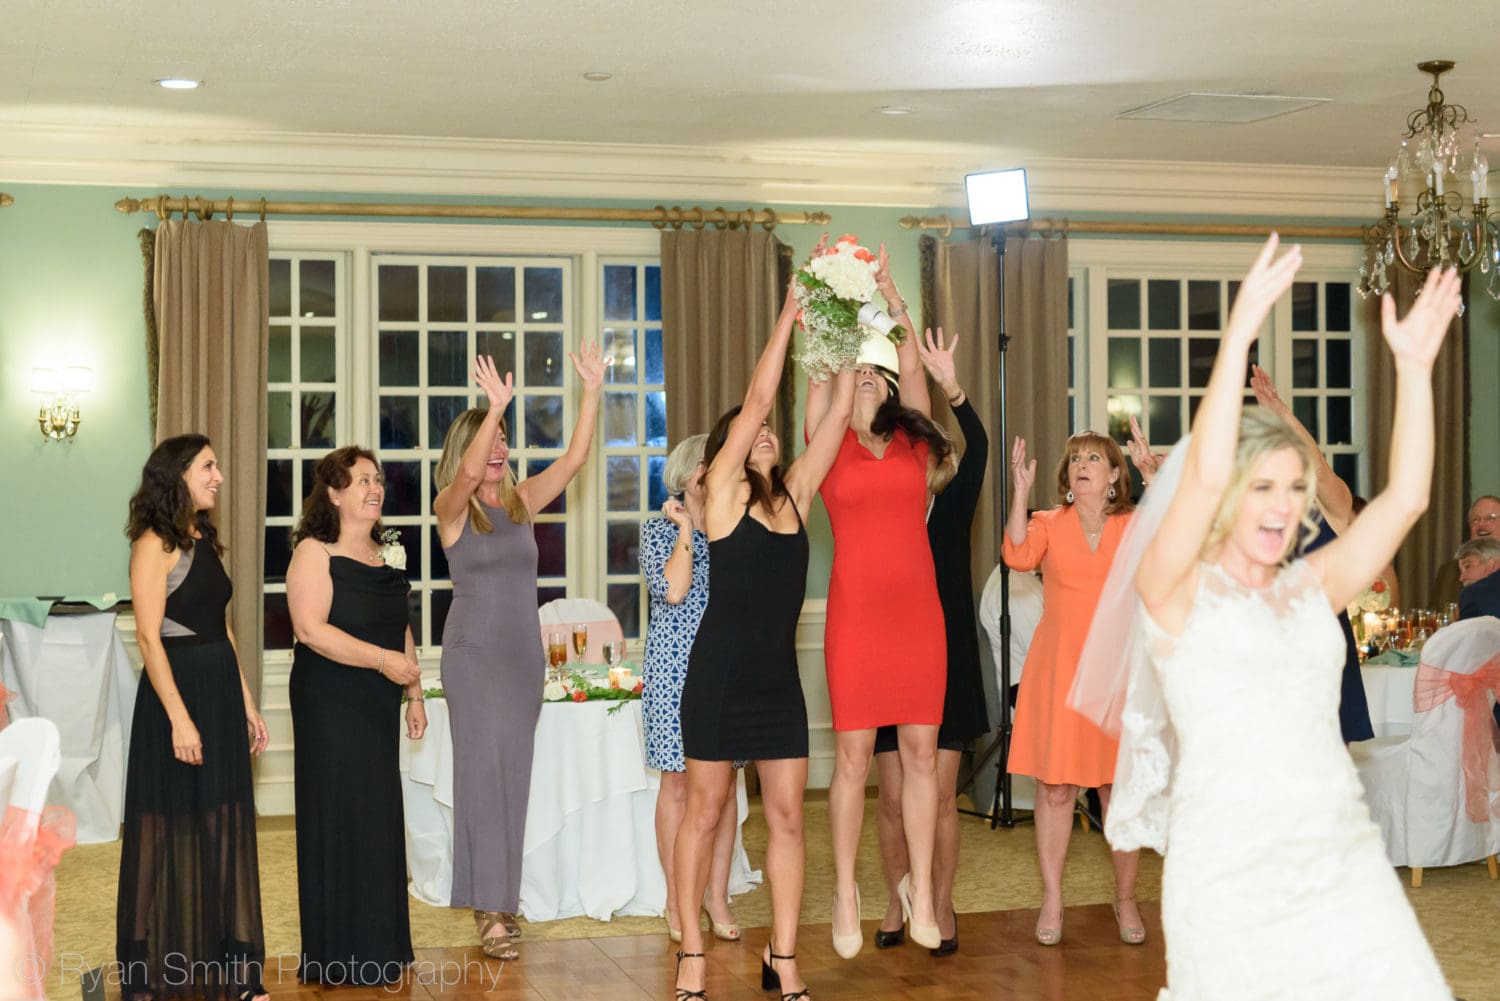 Catching the bouquet - Pawleys Plantation